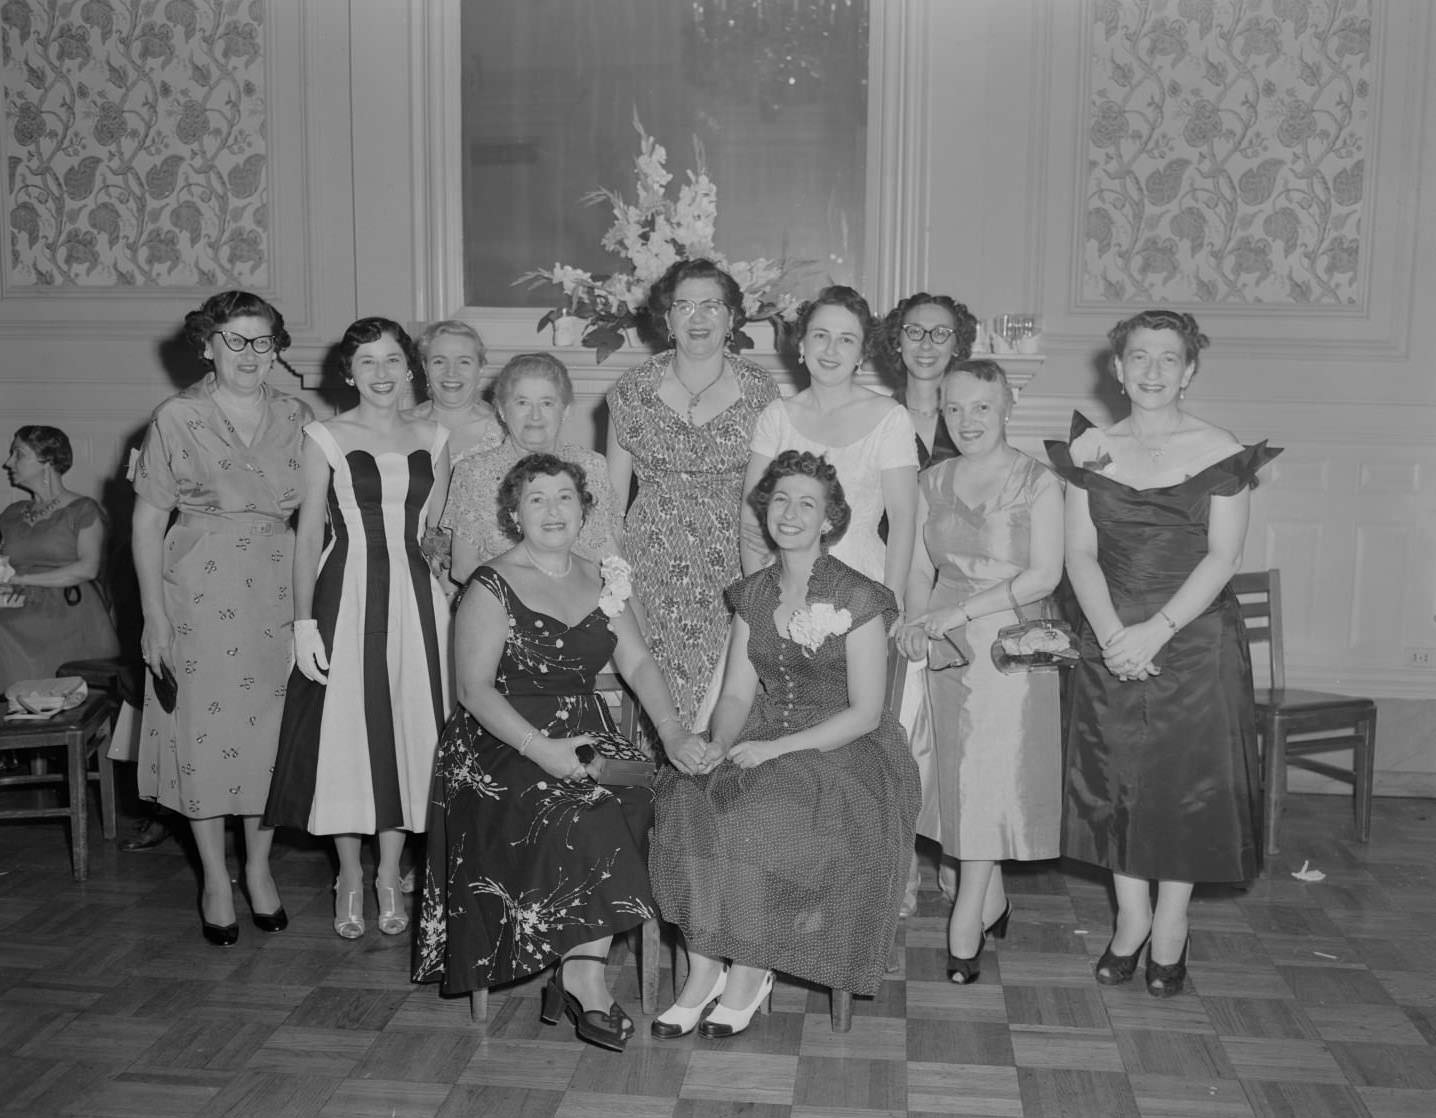 A group of women from the Austin Chapter of Hadassah posing for a photo at a formal gathering, 1954